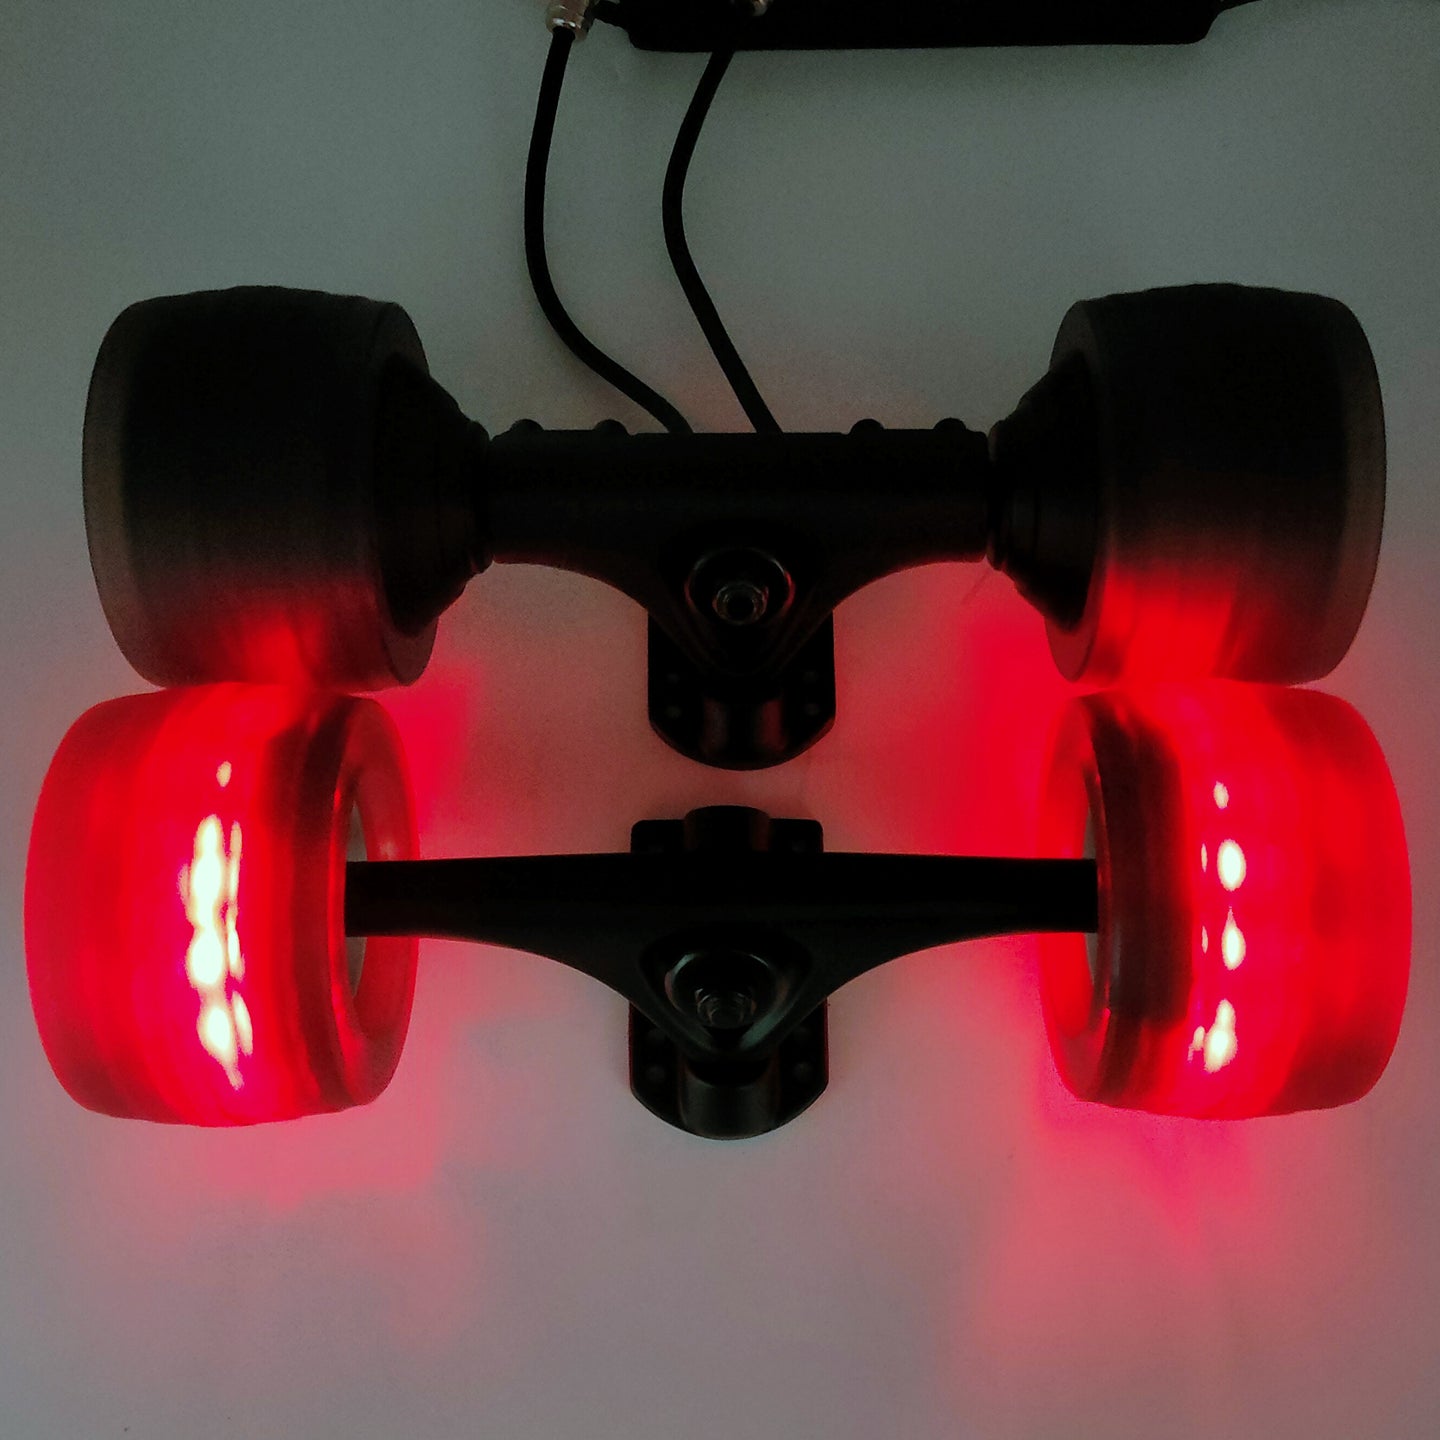 Upgrade your ride with 105mm AT Glow Wheels and Sleeves for Electric Skateboard - Illuminate your path with these high-performance all-terrain wheels, equipped with vibrant glow technology. The set includes durable sleeves for a smooth and stylish ride, perfect for enhancing your electric skateboard experience.